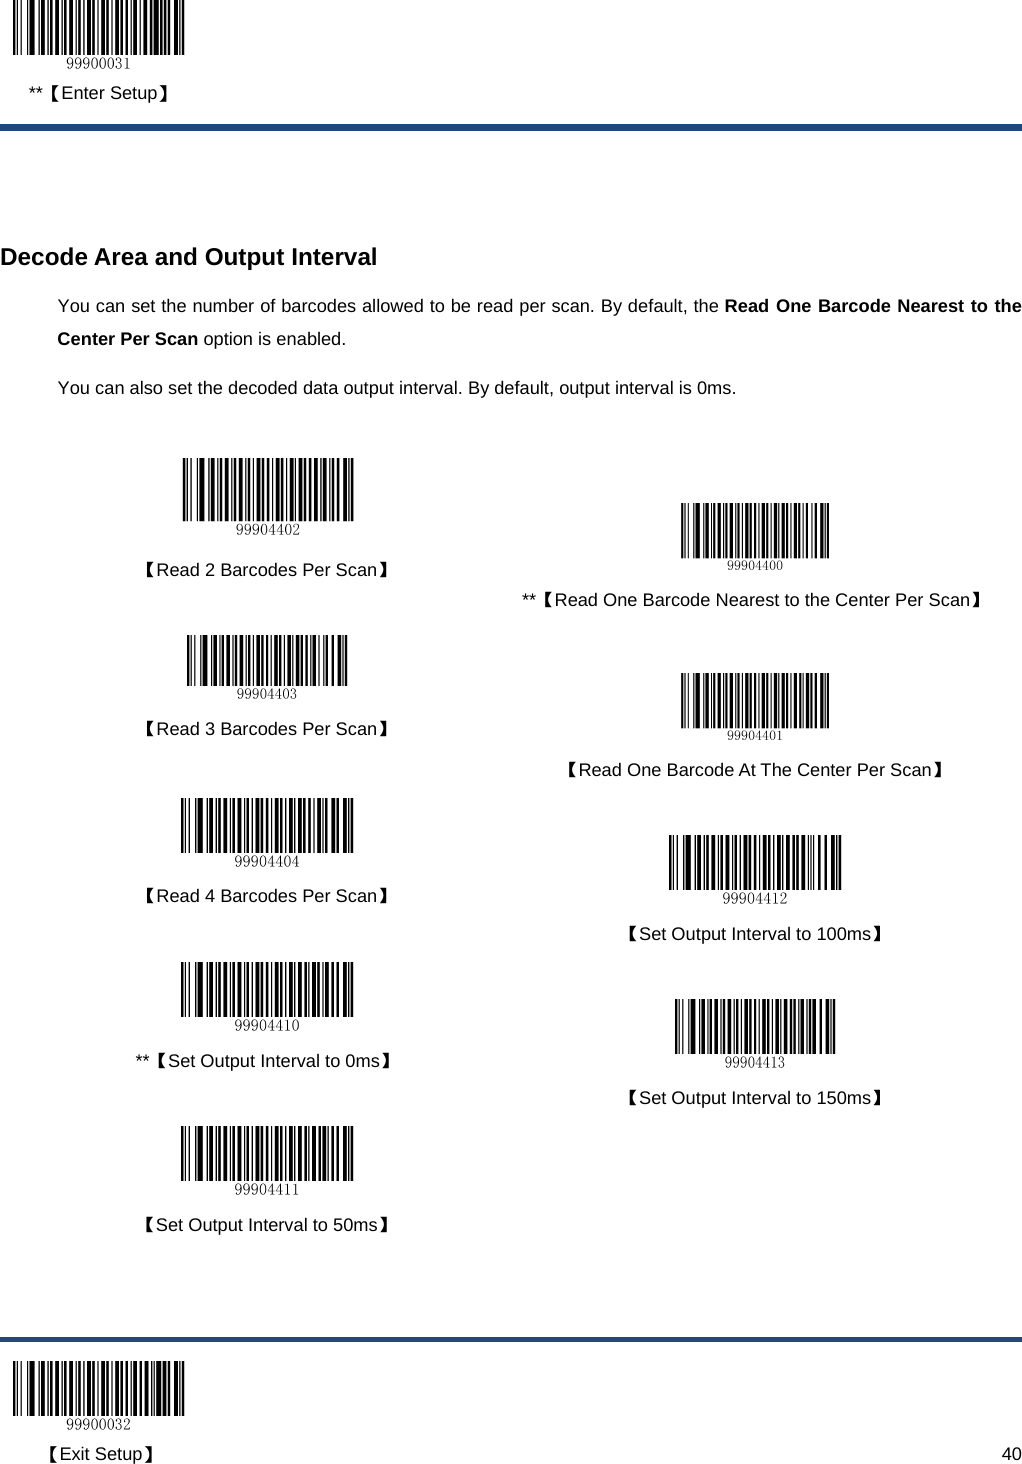  **【Enter Setup】  【Exit Setup】                                                                                                                                                                      40   Decode Area and Output Interval You can set the number of barcodes allowed to be read per scan. By default, the Read One Barcode Nearest to the Center Per Scan option is enabled. You can also set the decoded data output interval. By default, output interval is 0ms.     【Read 2 Barcodes Per Scan】   **【Read One Barcode Nearest to the Center Per Scan】  【Read 3 Barcodes Per Scan】   【Read One Barcode At The Center Per Scan】   【Read 4 Barcodes Per Scan】   【Set Output Interval to 100ms】   **【Set Output Interval to 0ms】   【Set Output Interval to 150ms】  【Set Output Interval to 50ms】   